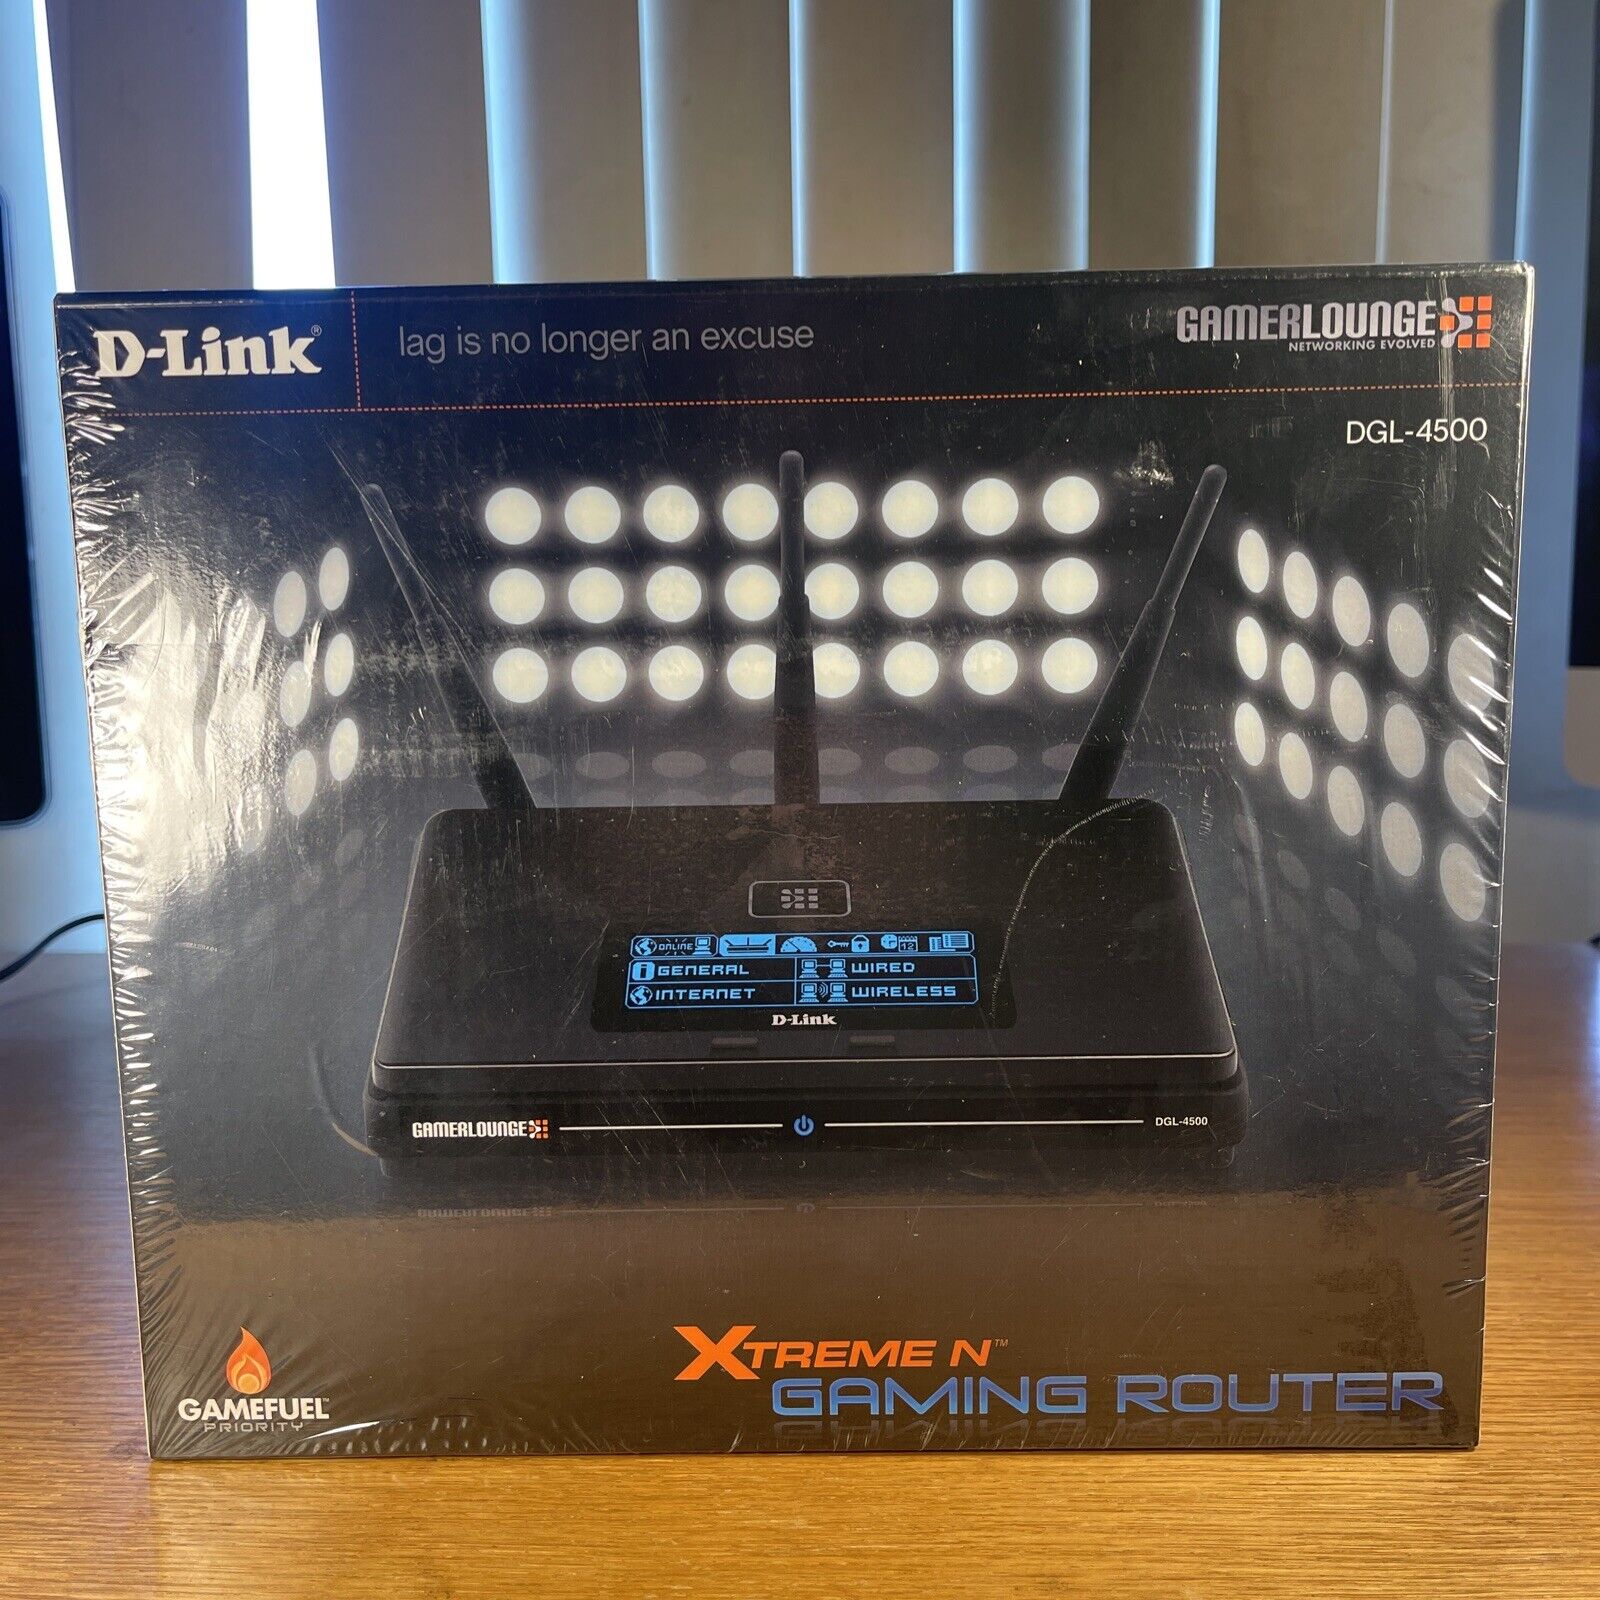 D-Link Xtreme N Gaming Router DLG-4500 Gamer Lounge NEW Sealed 